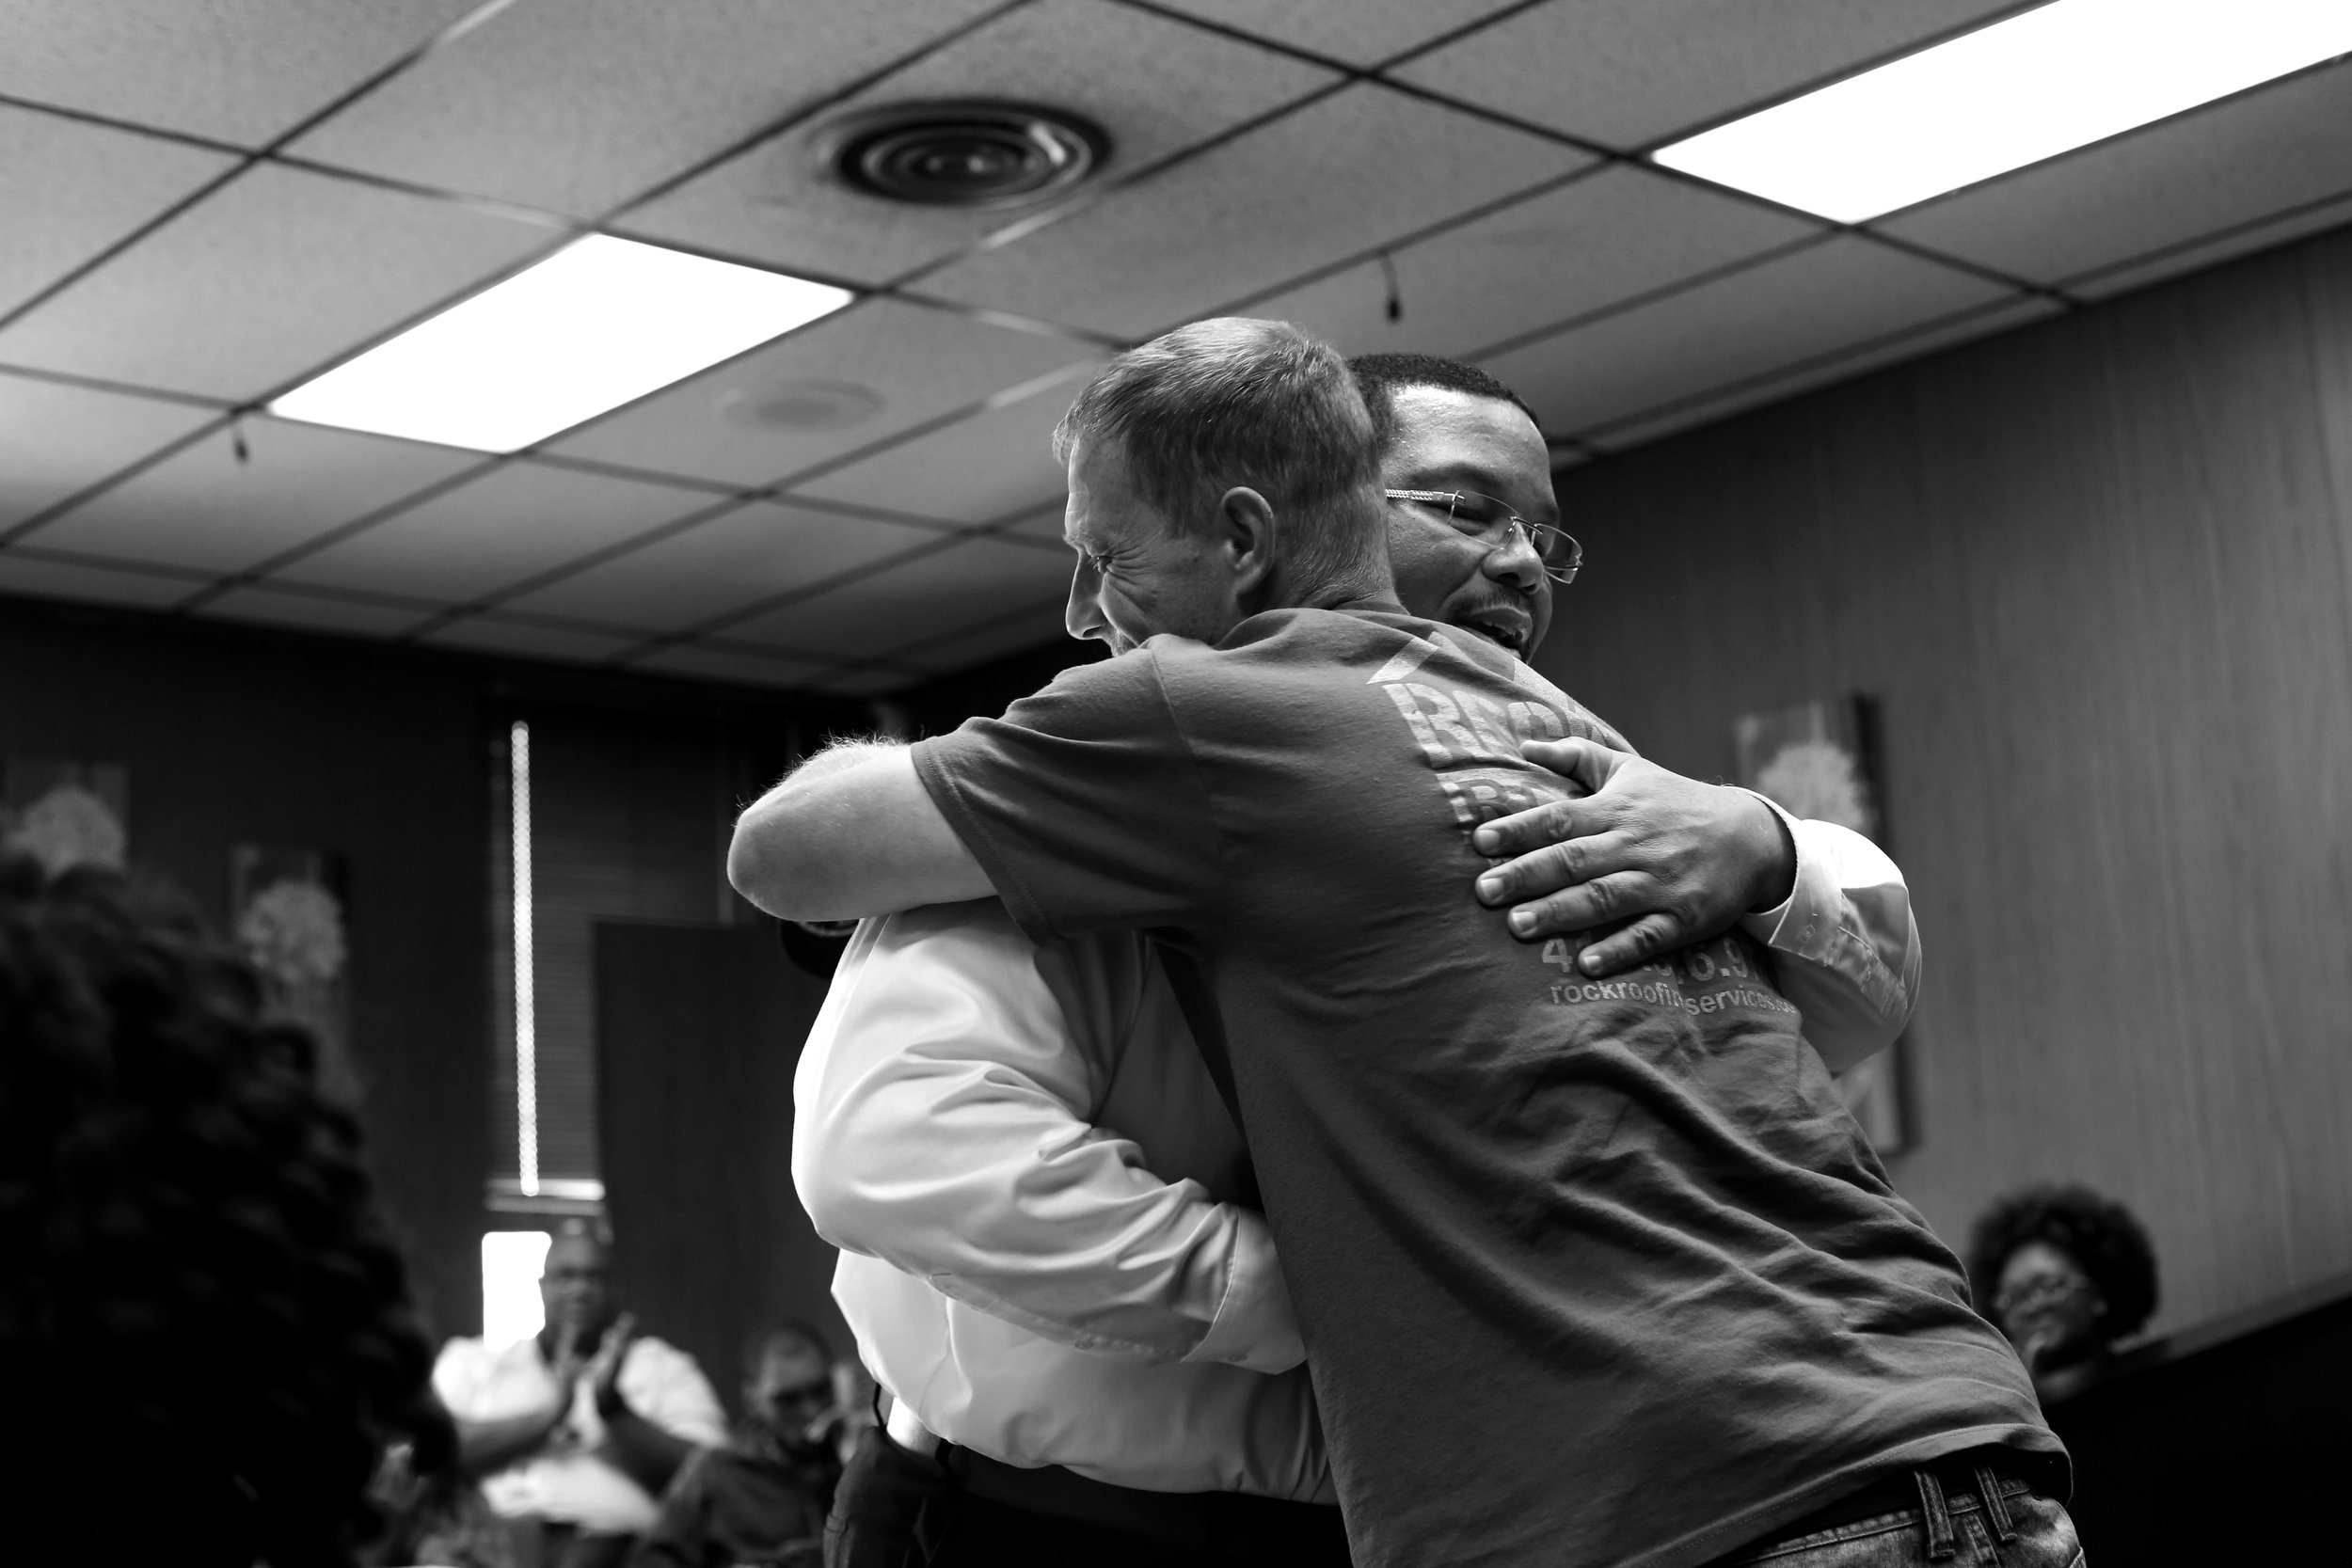  Lucas County Common Pleas Judge Ian English, left, embraces Jimmie Vallier after they met during a session of drug court in Toledo, Ohio, on June 28, 2017. Toledo's drug court, created in response to the rising opioid epidemic, was wrapping up its f